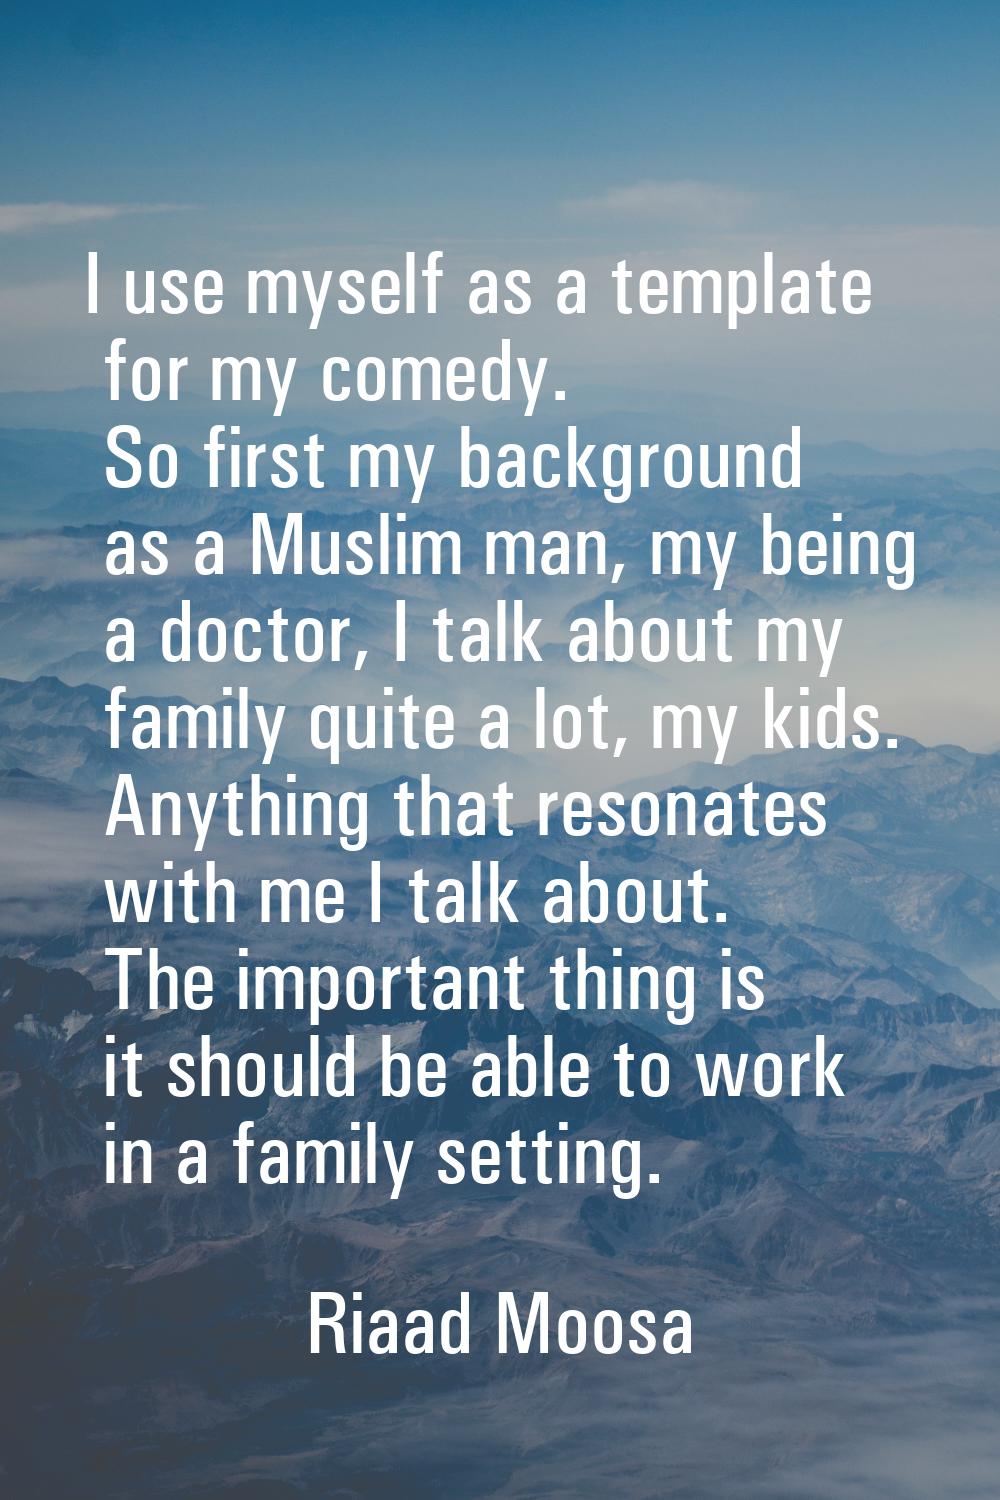 I use myself as a template for my comedy. So first my background as a Muslim man, my being a doctor